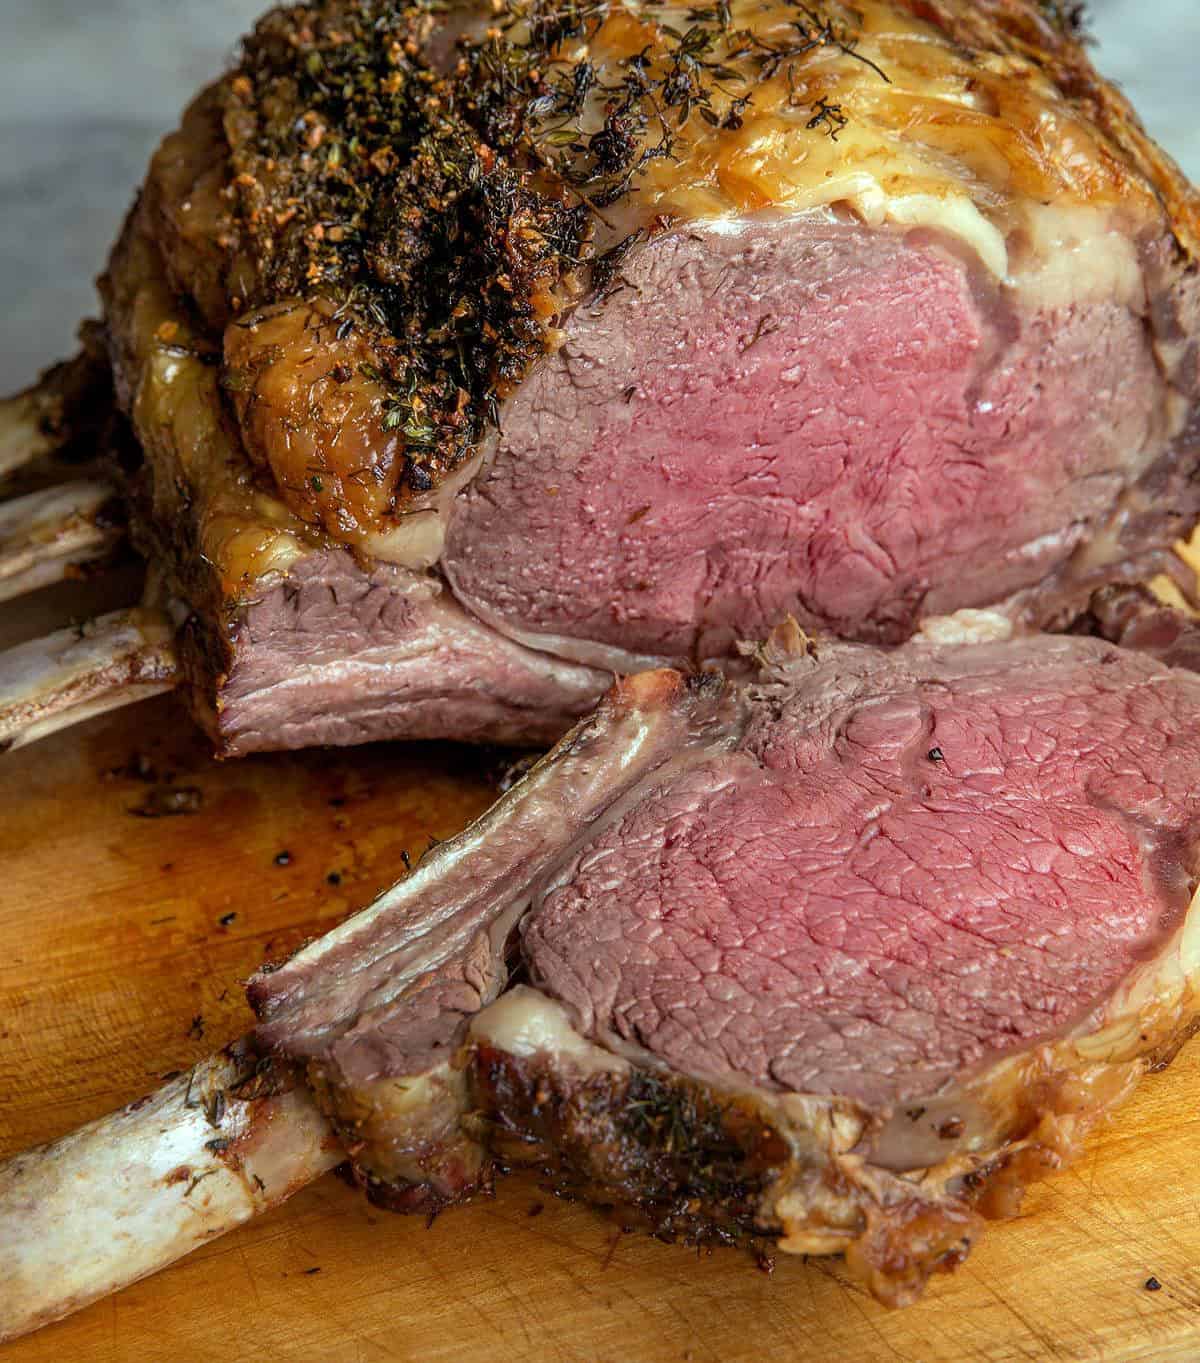  Make sure to give the roast some time to come to room temperature before cooking it; trust me, it makes a difference.